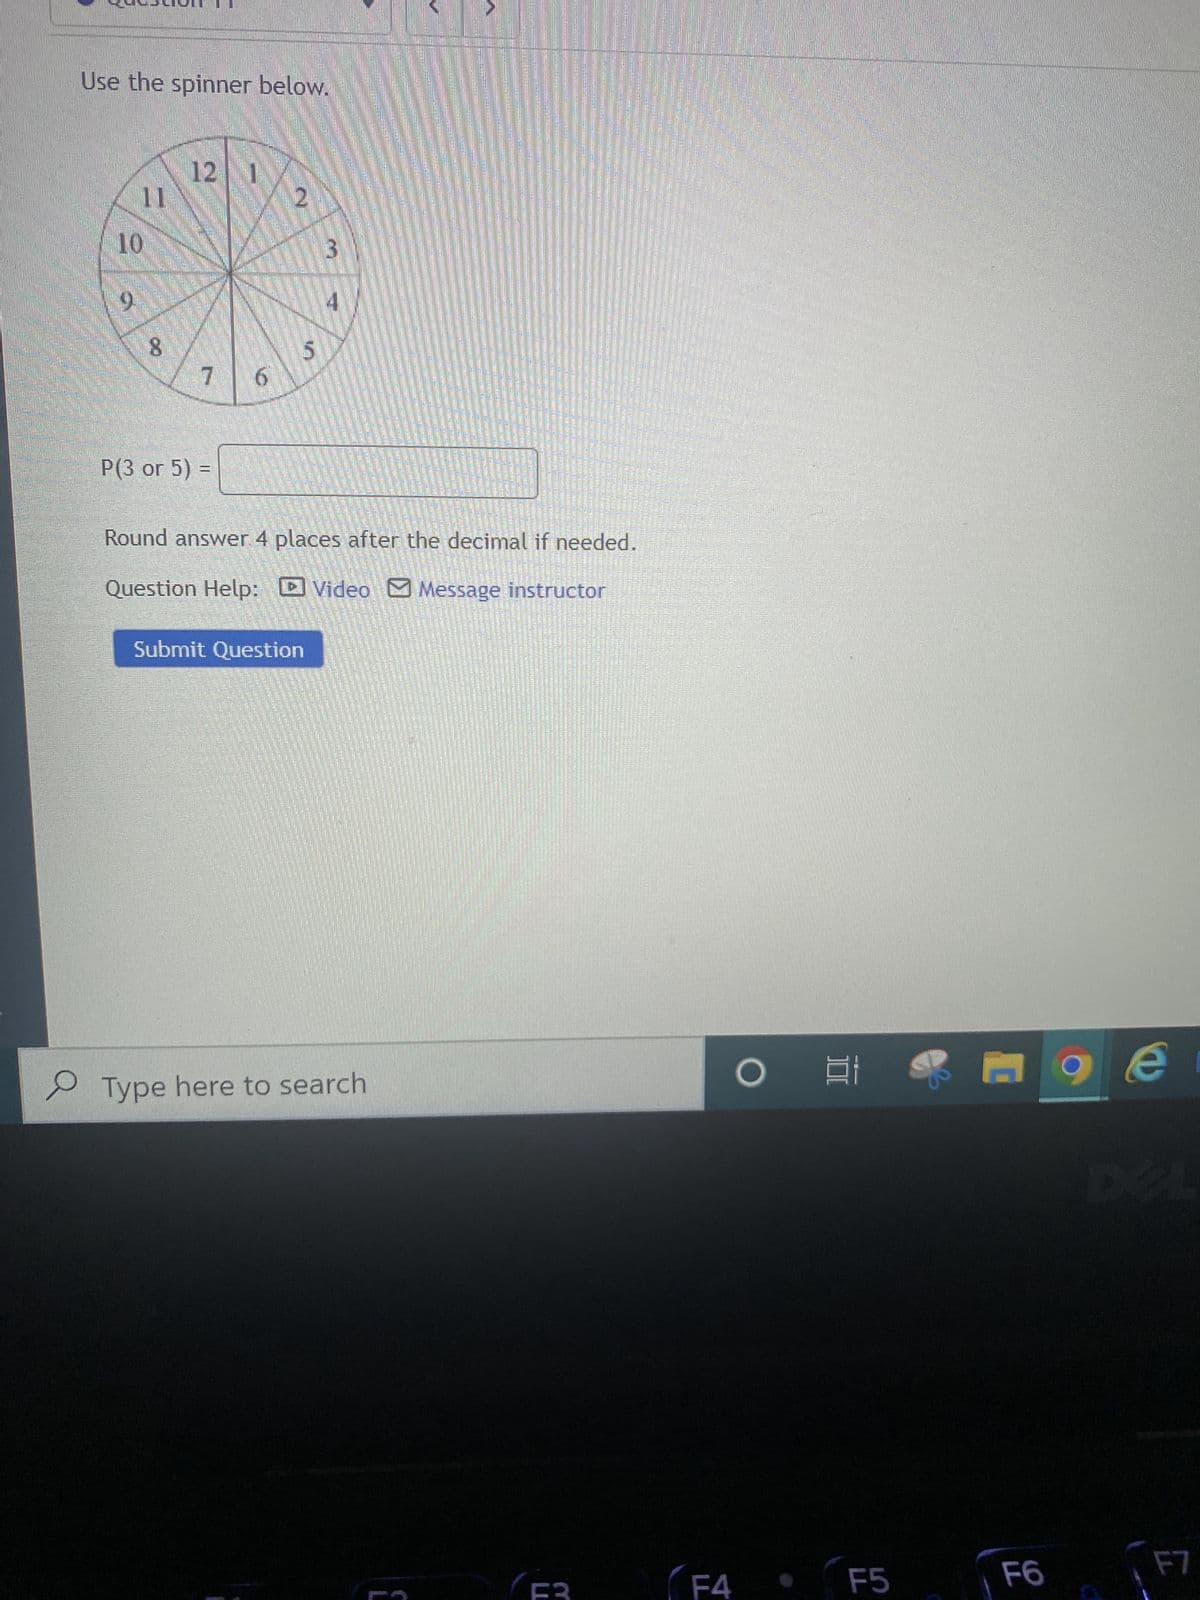 Use the spinner below.
12 1
11
3
10
0
8
7
P(3 or 5) =
Round answer. 4 places after the decimal if needed.
Question Help: Video Message instructor
Submit Question
Type here to search
6
4
5
(F3
F4
O
E 9
F5
F6
e
F7